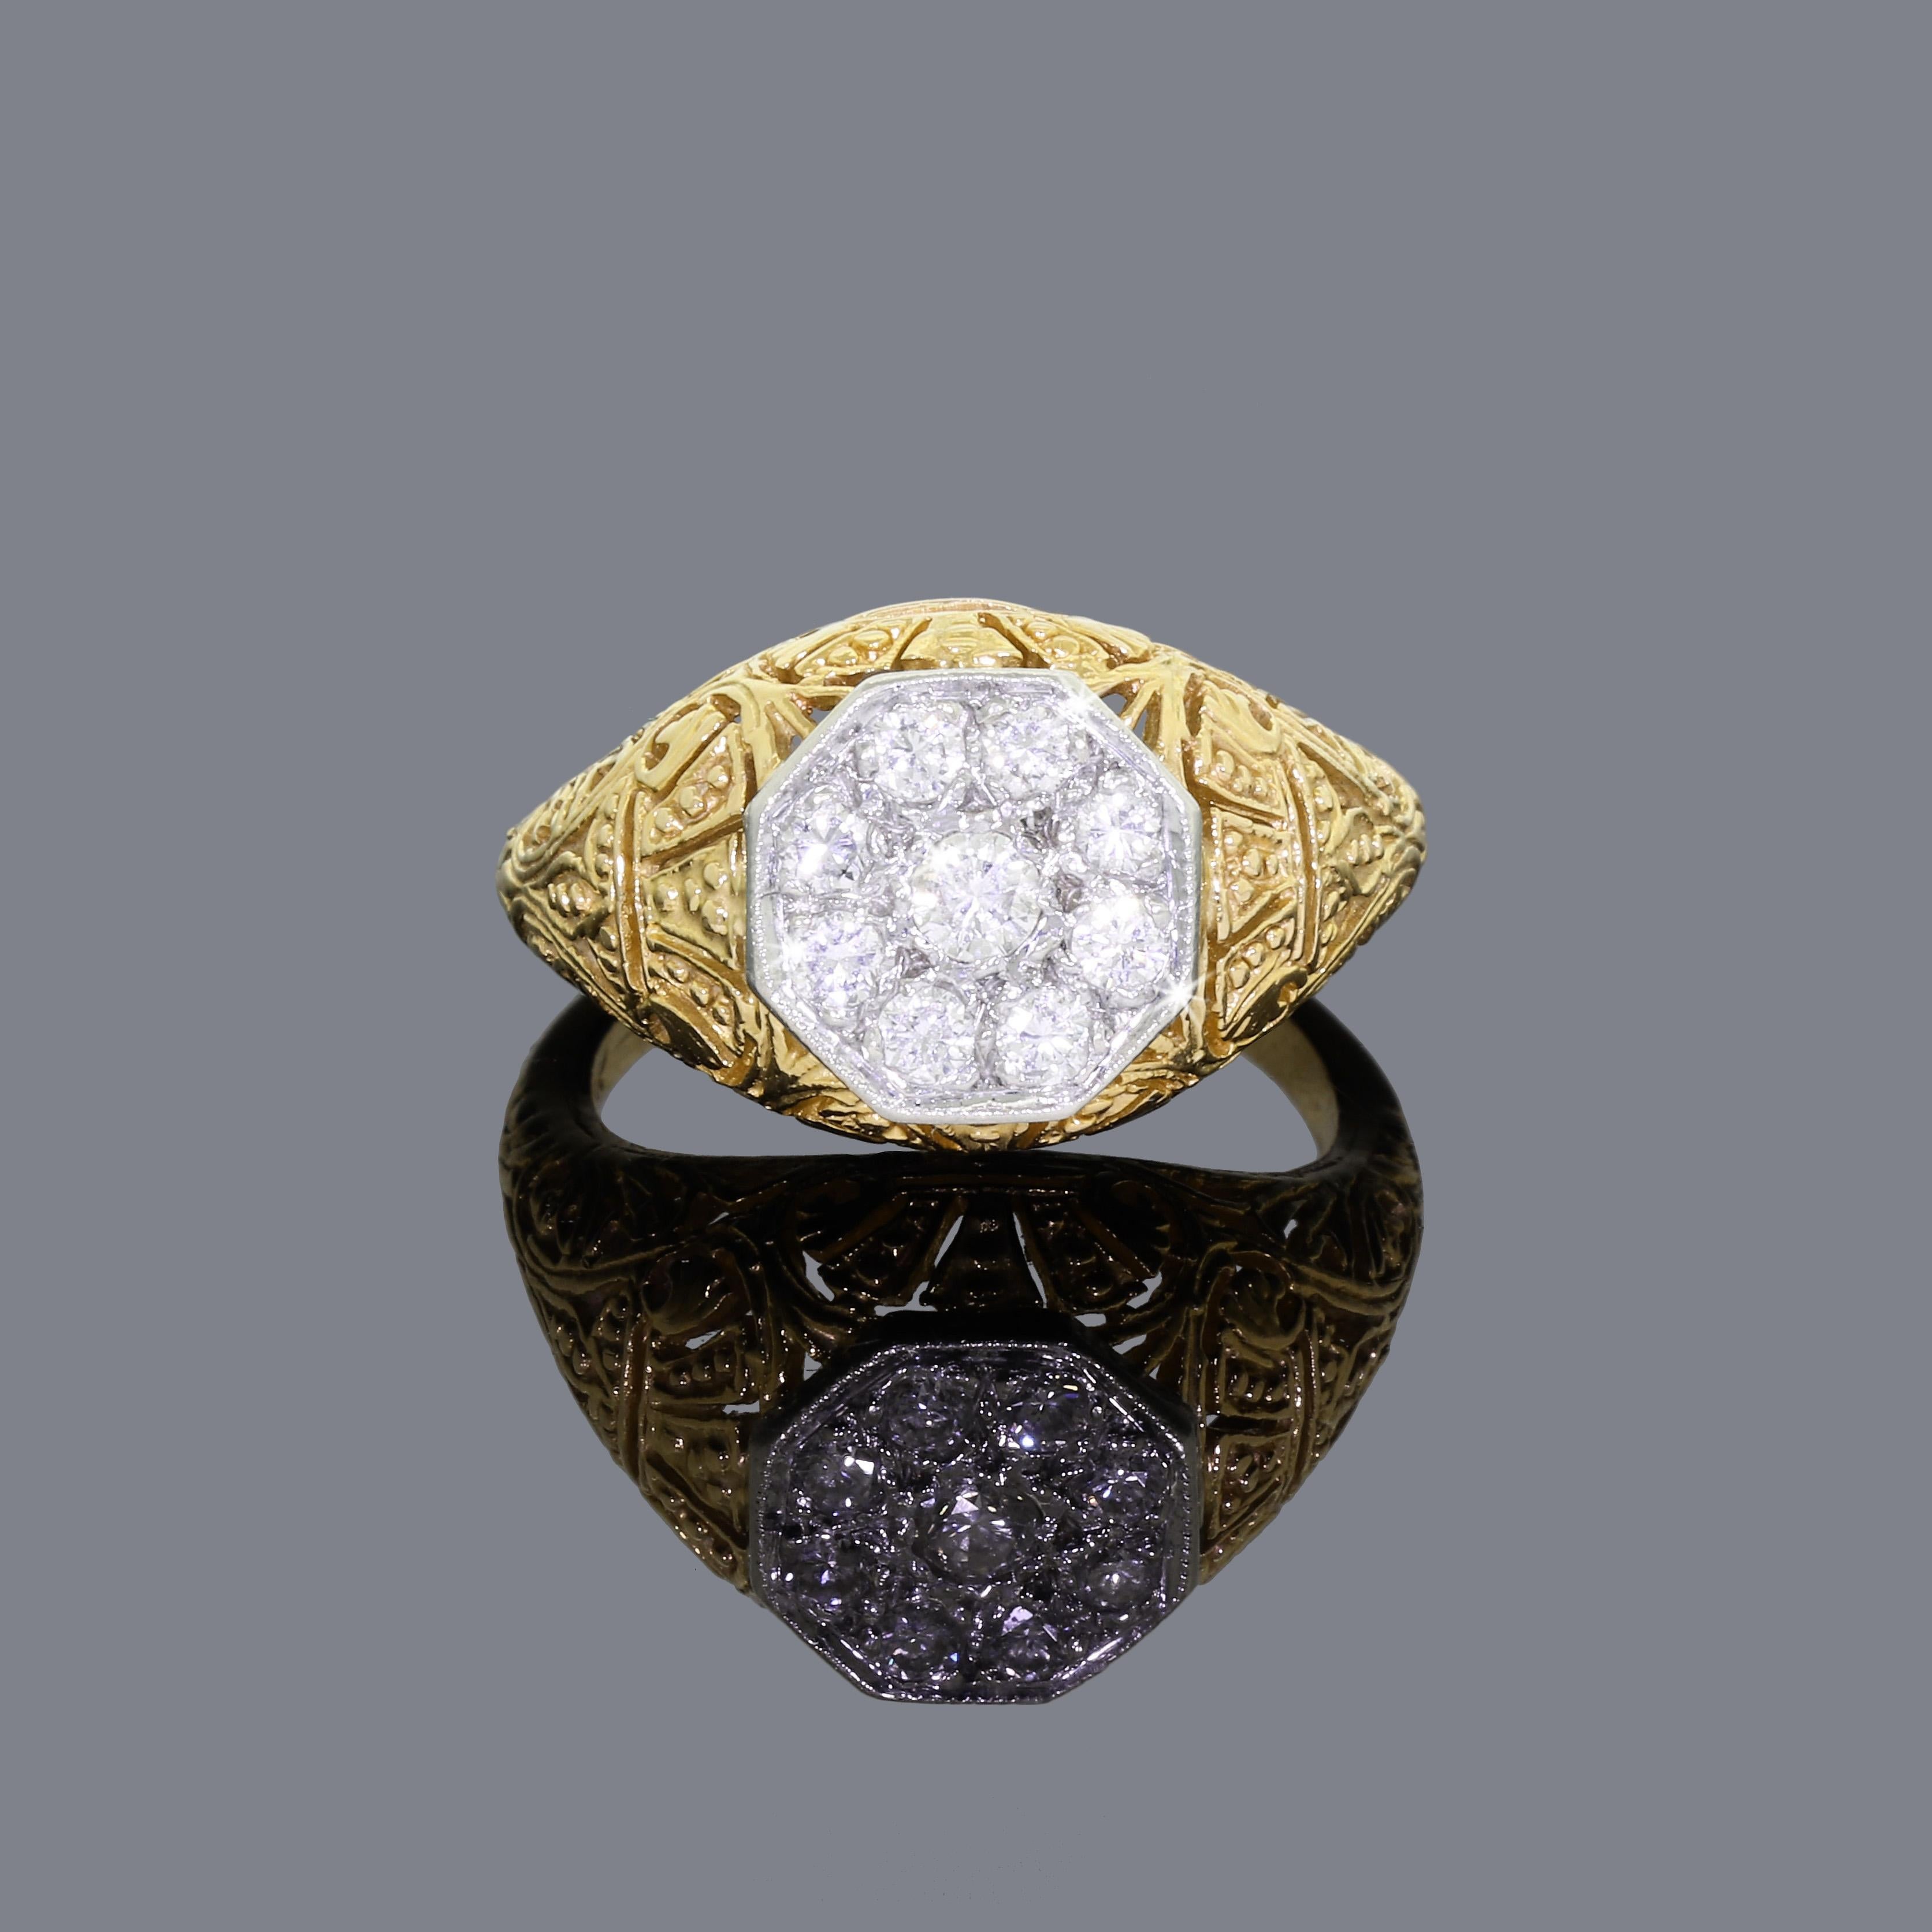 The is one of those rings that the moment that you see it in person, you can tell that it was very well made and a high quality piece.
Beautiful Art Deco style (but dates later) with intricate detailing covers the whole top half of the ring. At the